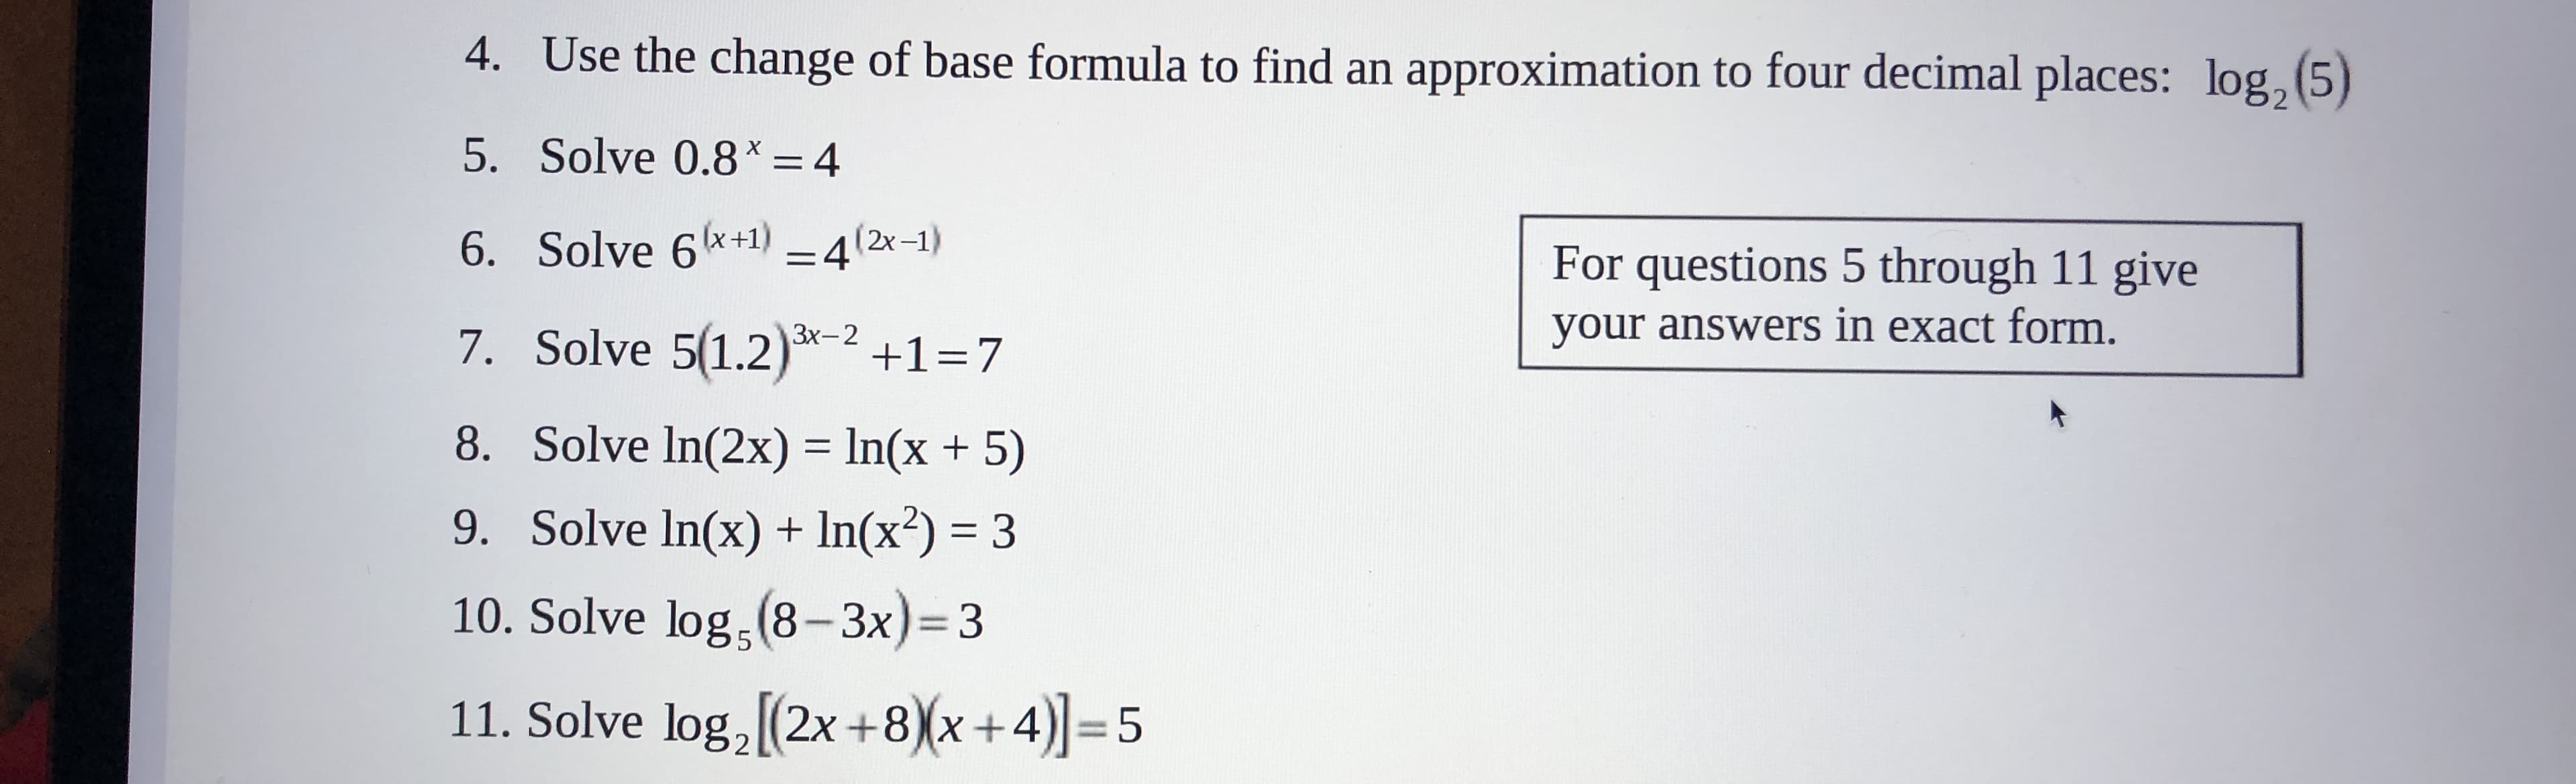 4. Use the change of base formula to find an approximation to four decimal places: log
5)
5. Solve 0.8x = 4
6. Solve 6+1) -4(2x-1)
For questions 5 through 11 give
your answers in exact form.
7. Solve 5(1.2)
Зх-2
+1-7
8. Solve In(2x)
ln(x + 5)
9. Solve In(x) + In(x2) 3
10. Solve log (8-3x)=3
5
11. Solve log, (2x +8)x+4)=5
Ln
